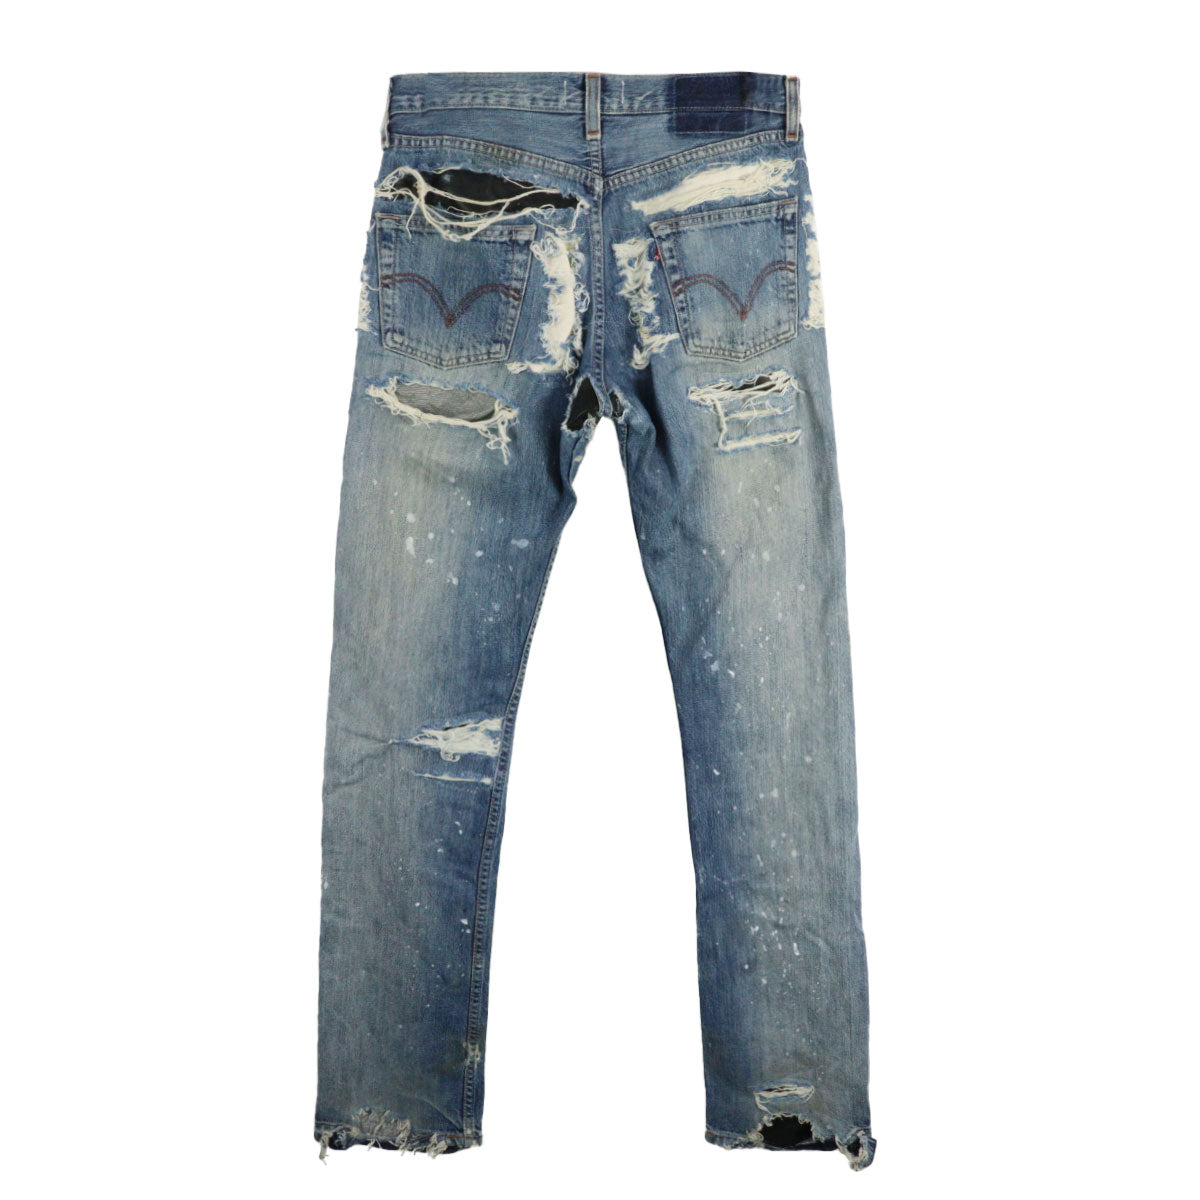 DESTROY LEATHER DENIM PANTS 30A | Why are you here?